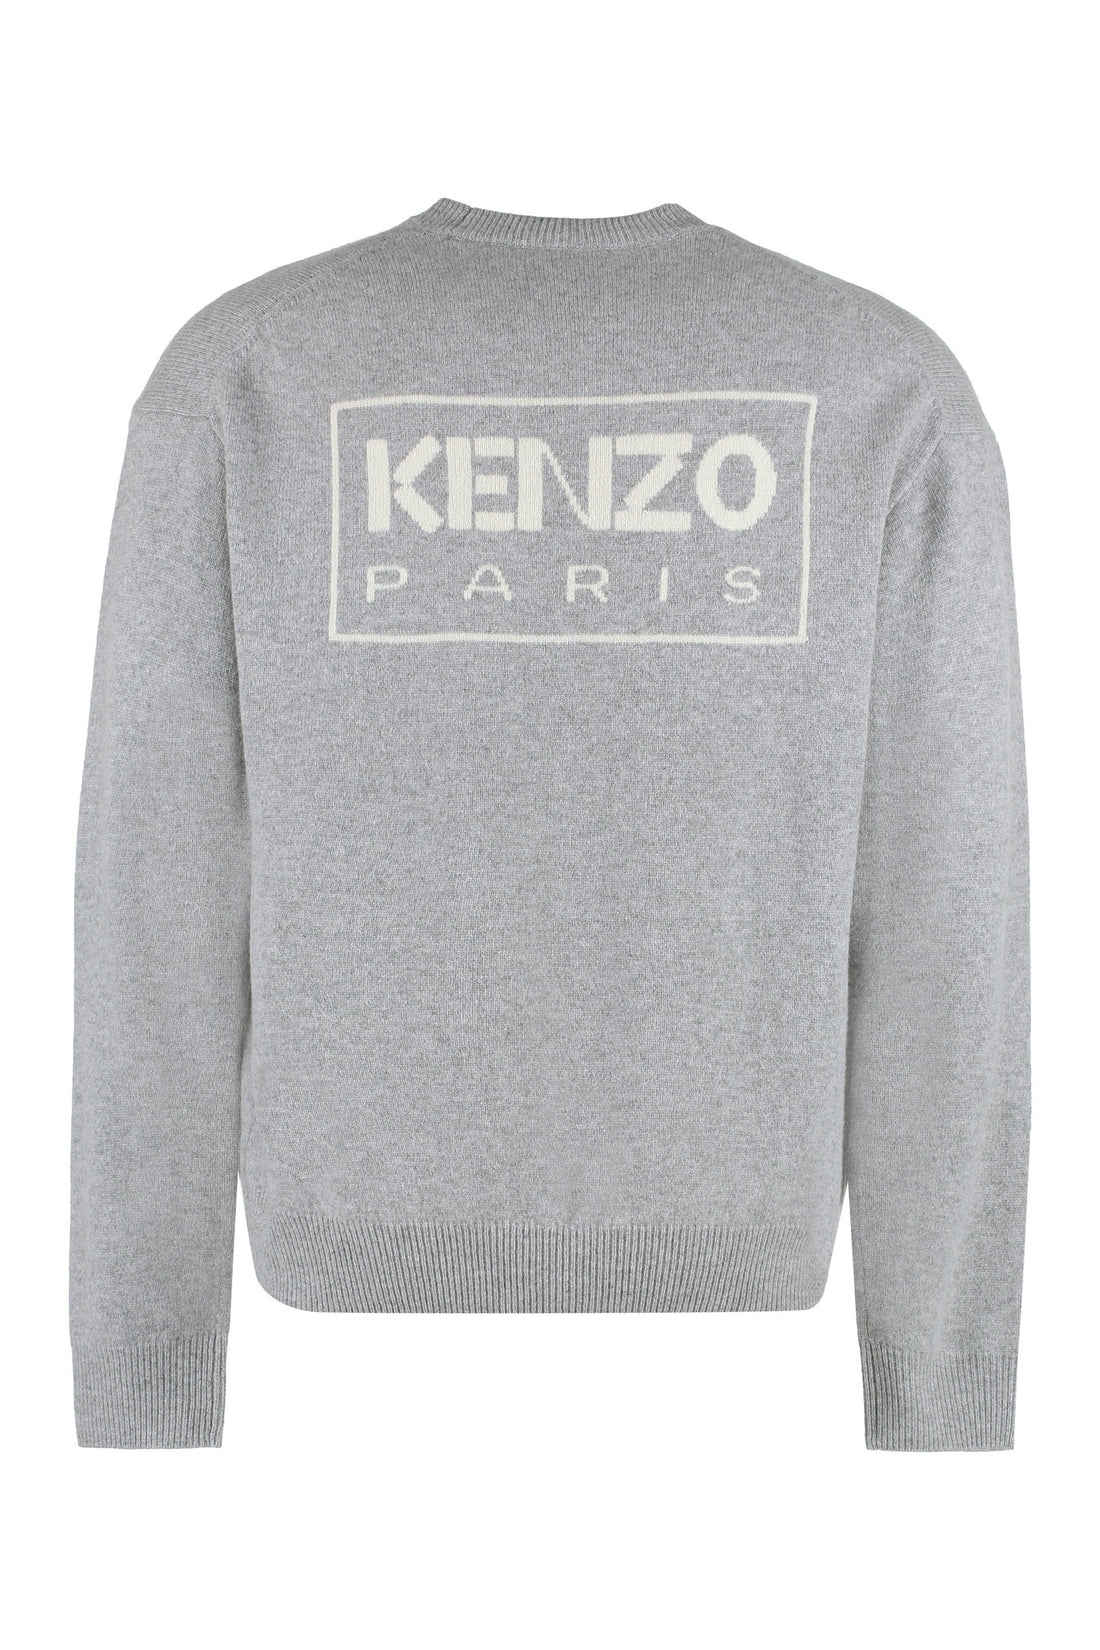 Kenzo-OUTLET-SALE-Wool crew-neck sweater-ARCHIVIST